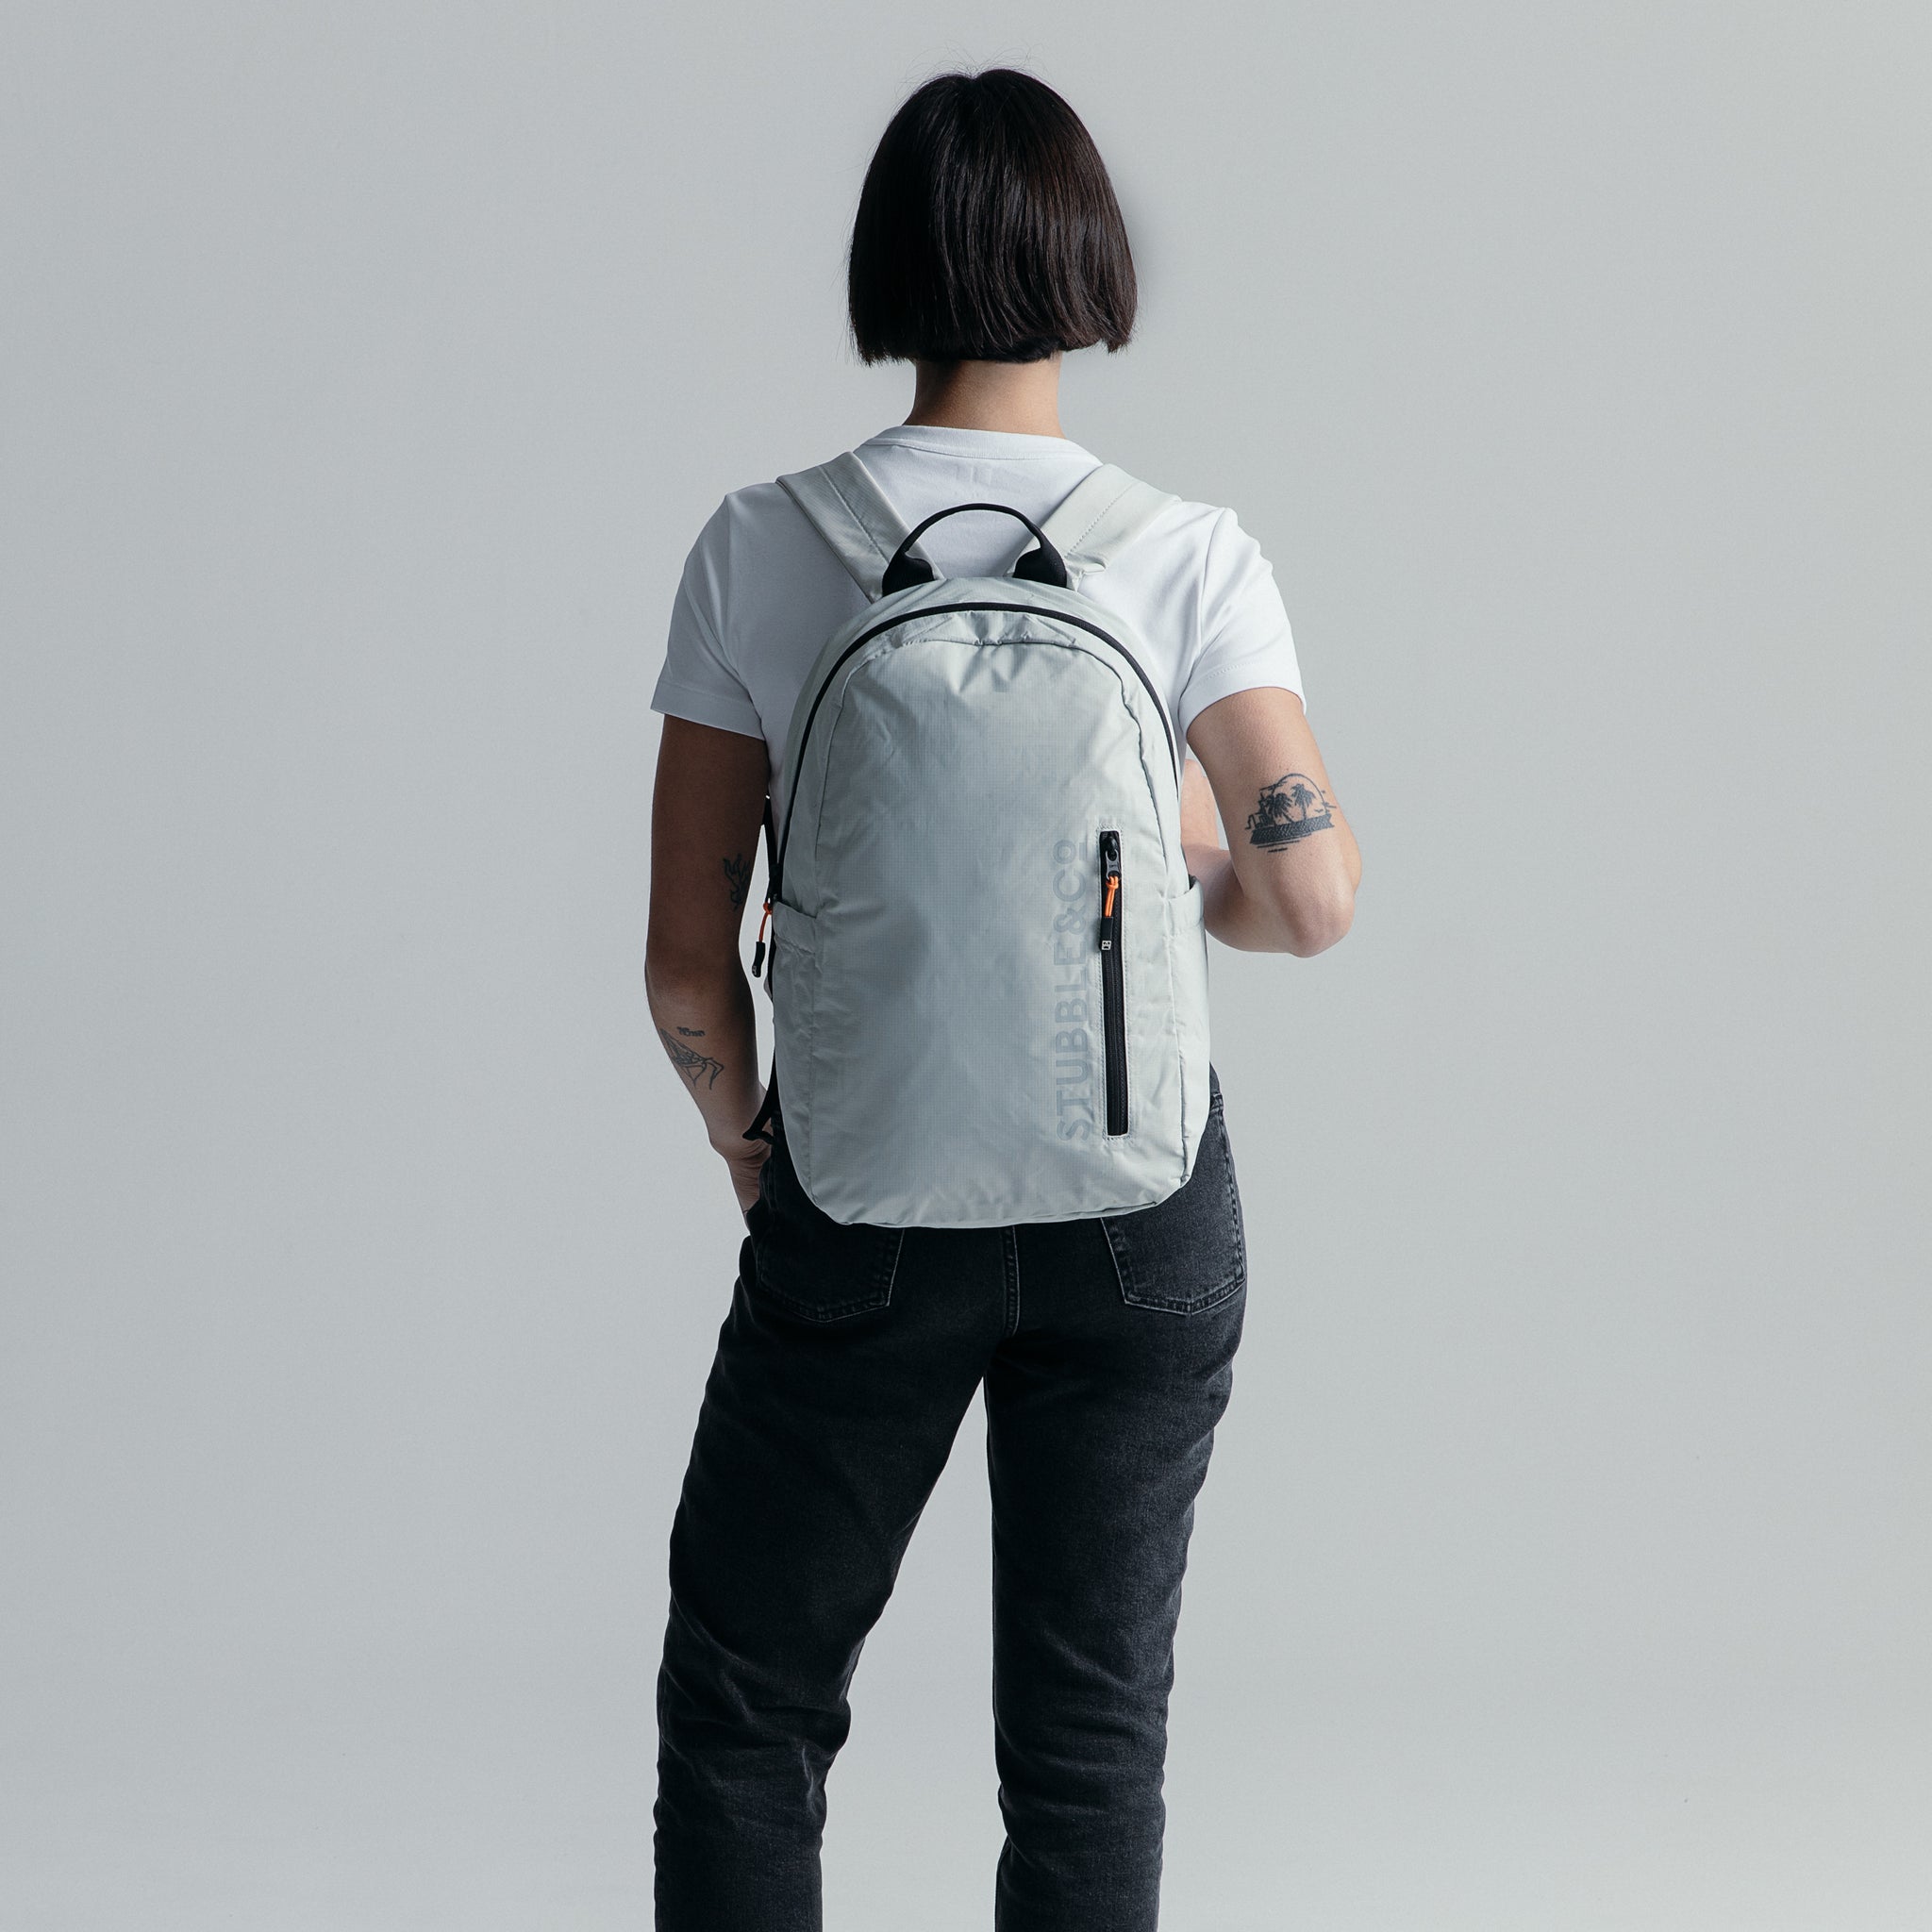 Women wearing the packable Off White Ultra Light Backpack